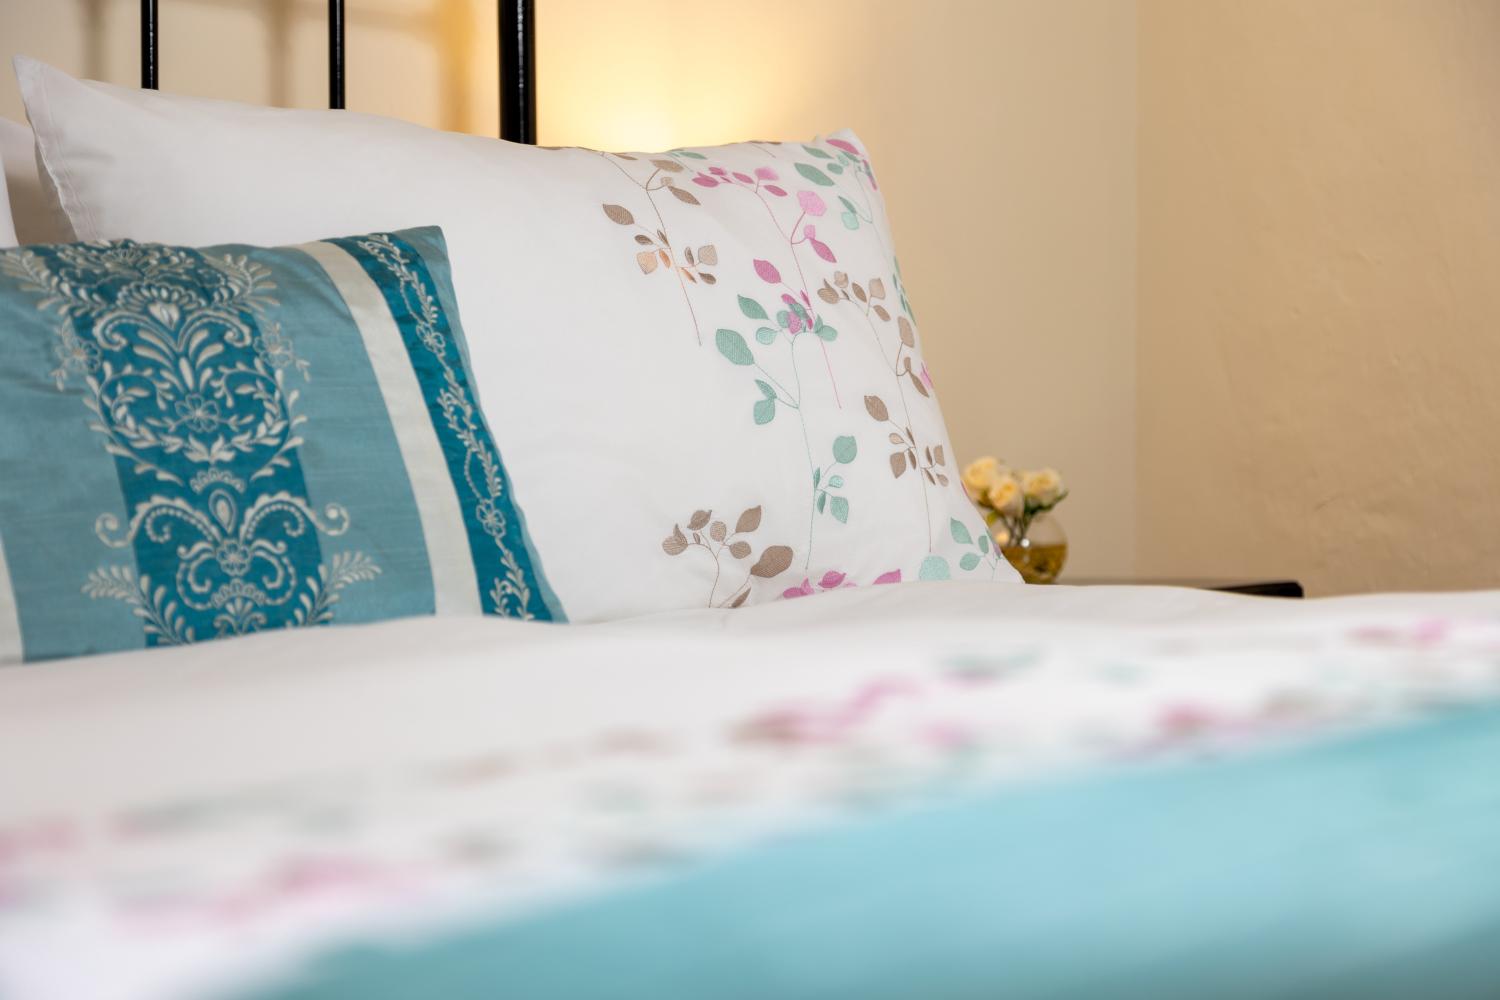 We provide high quality bedding and linens in all our bedrooms.